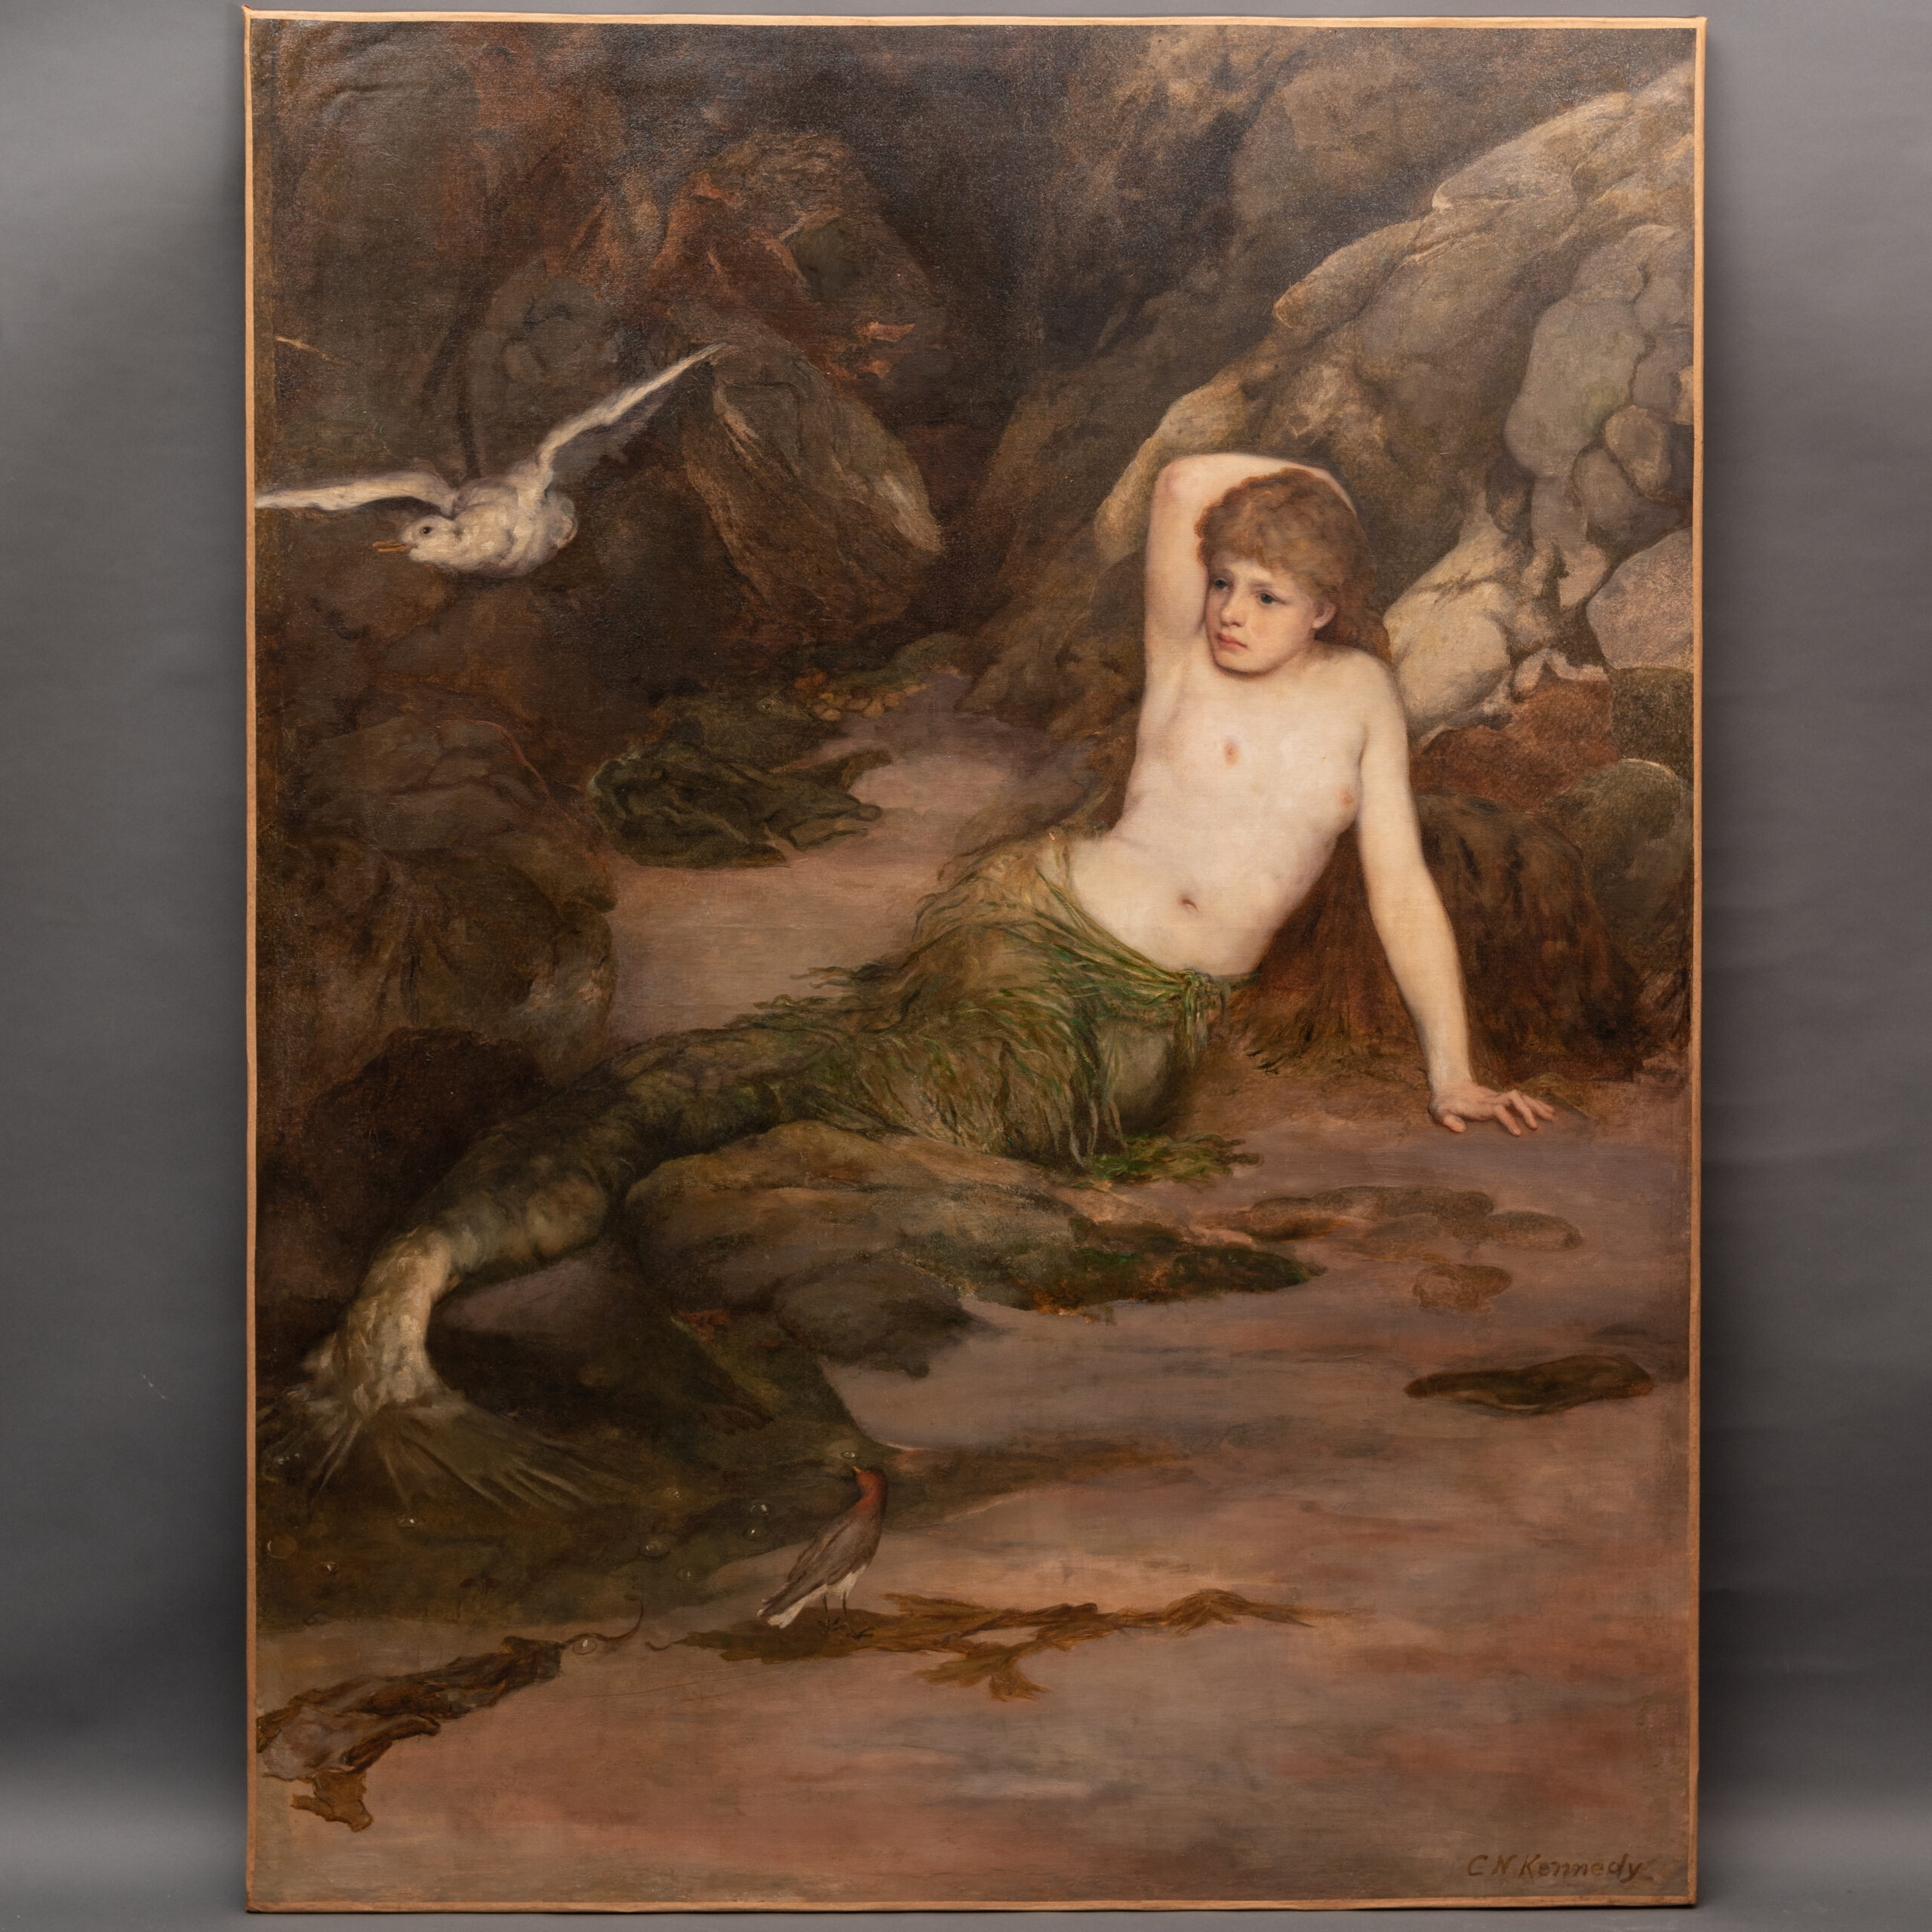 The Mermaid Oil on canvas by Charles Napier Kennedy